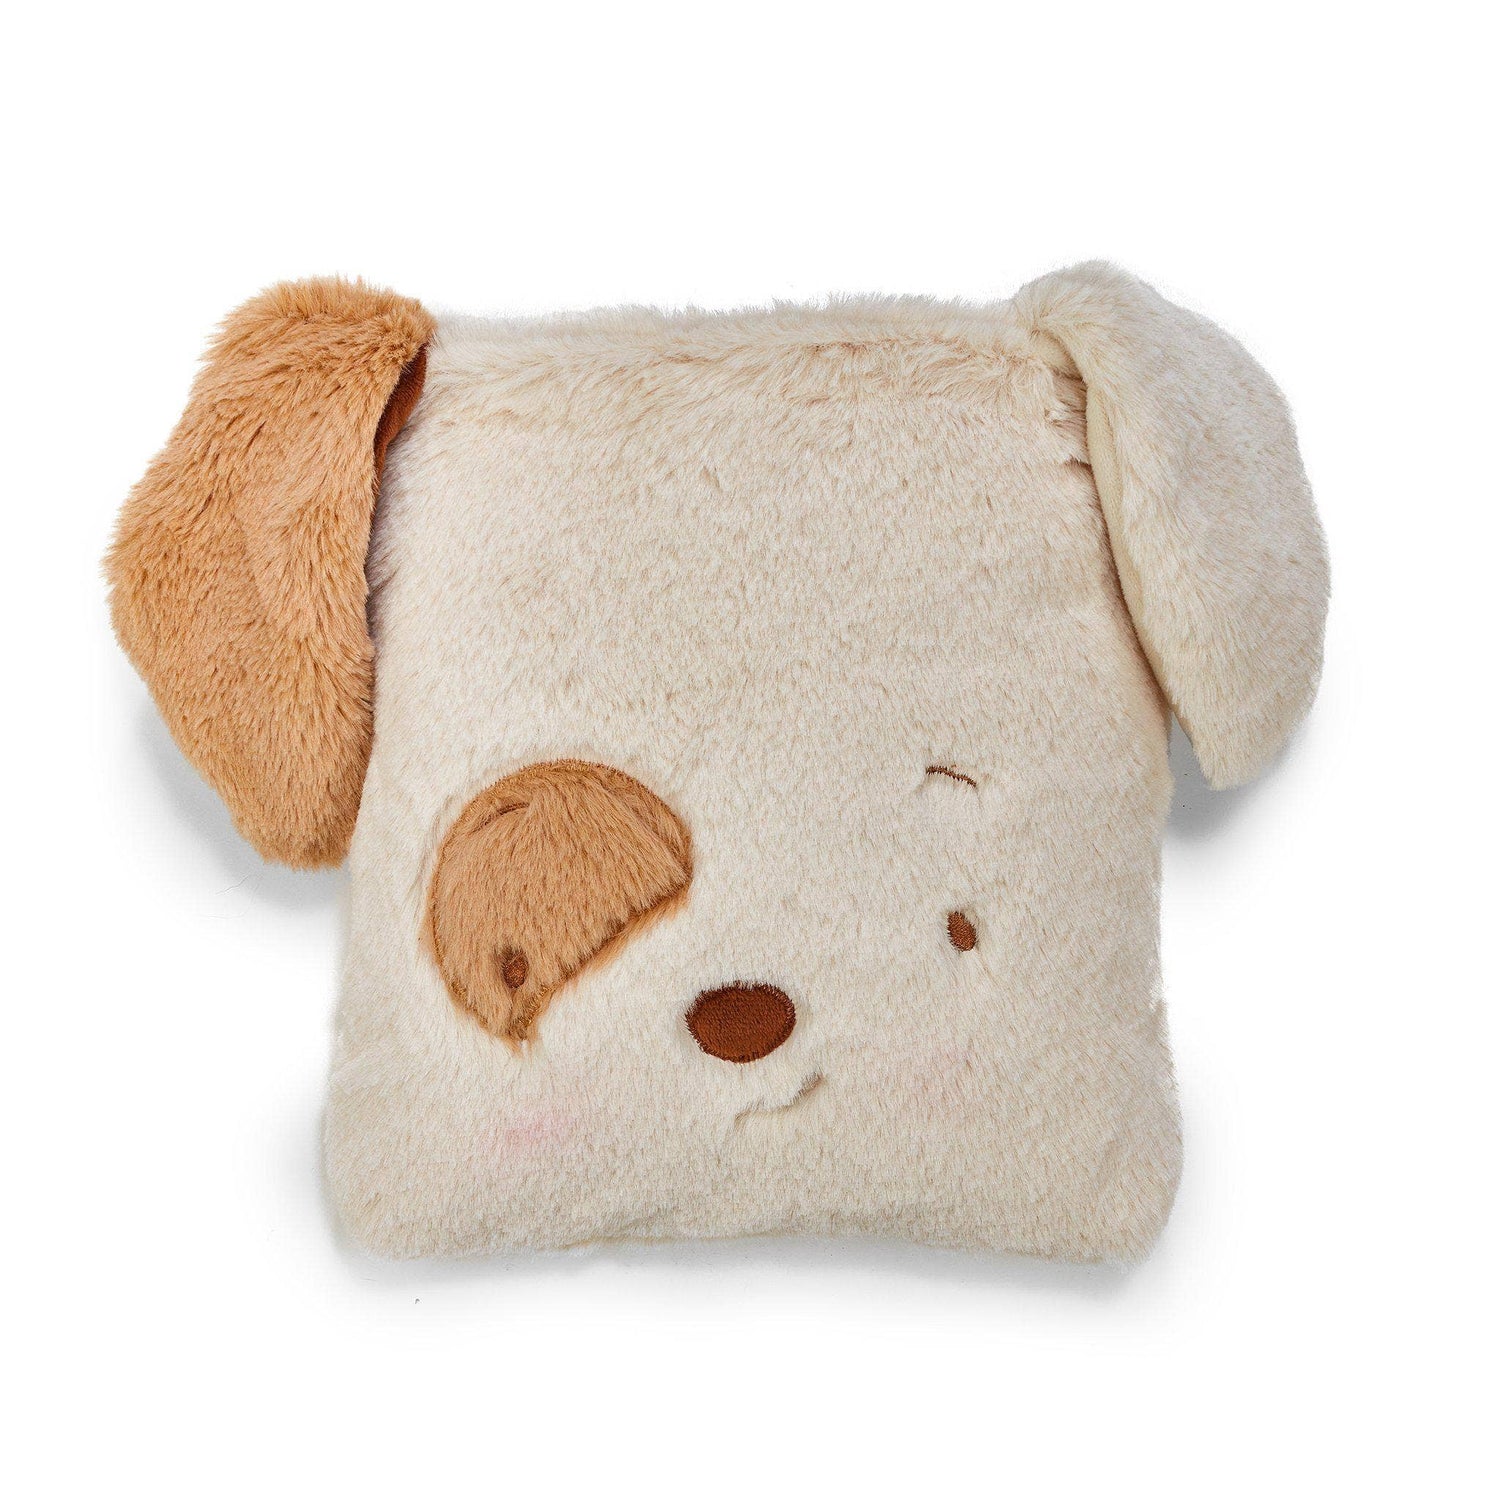 Skipit Blanket and Pillow Puppy Plush by Bunnies by the Bay